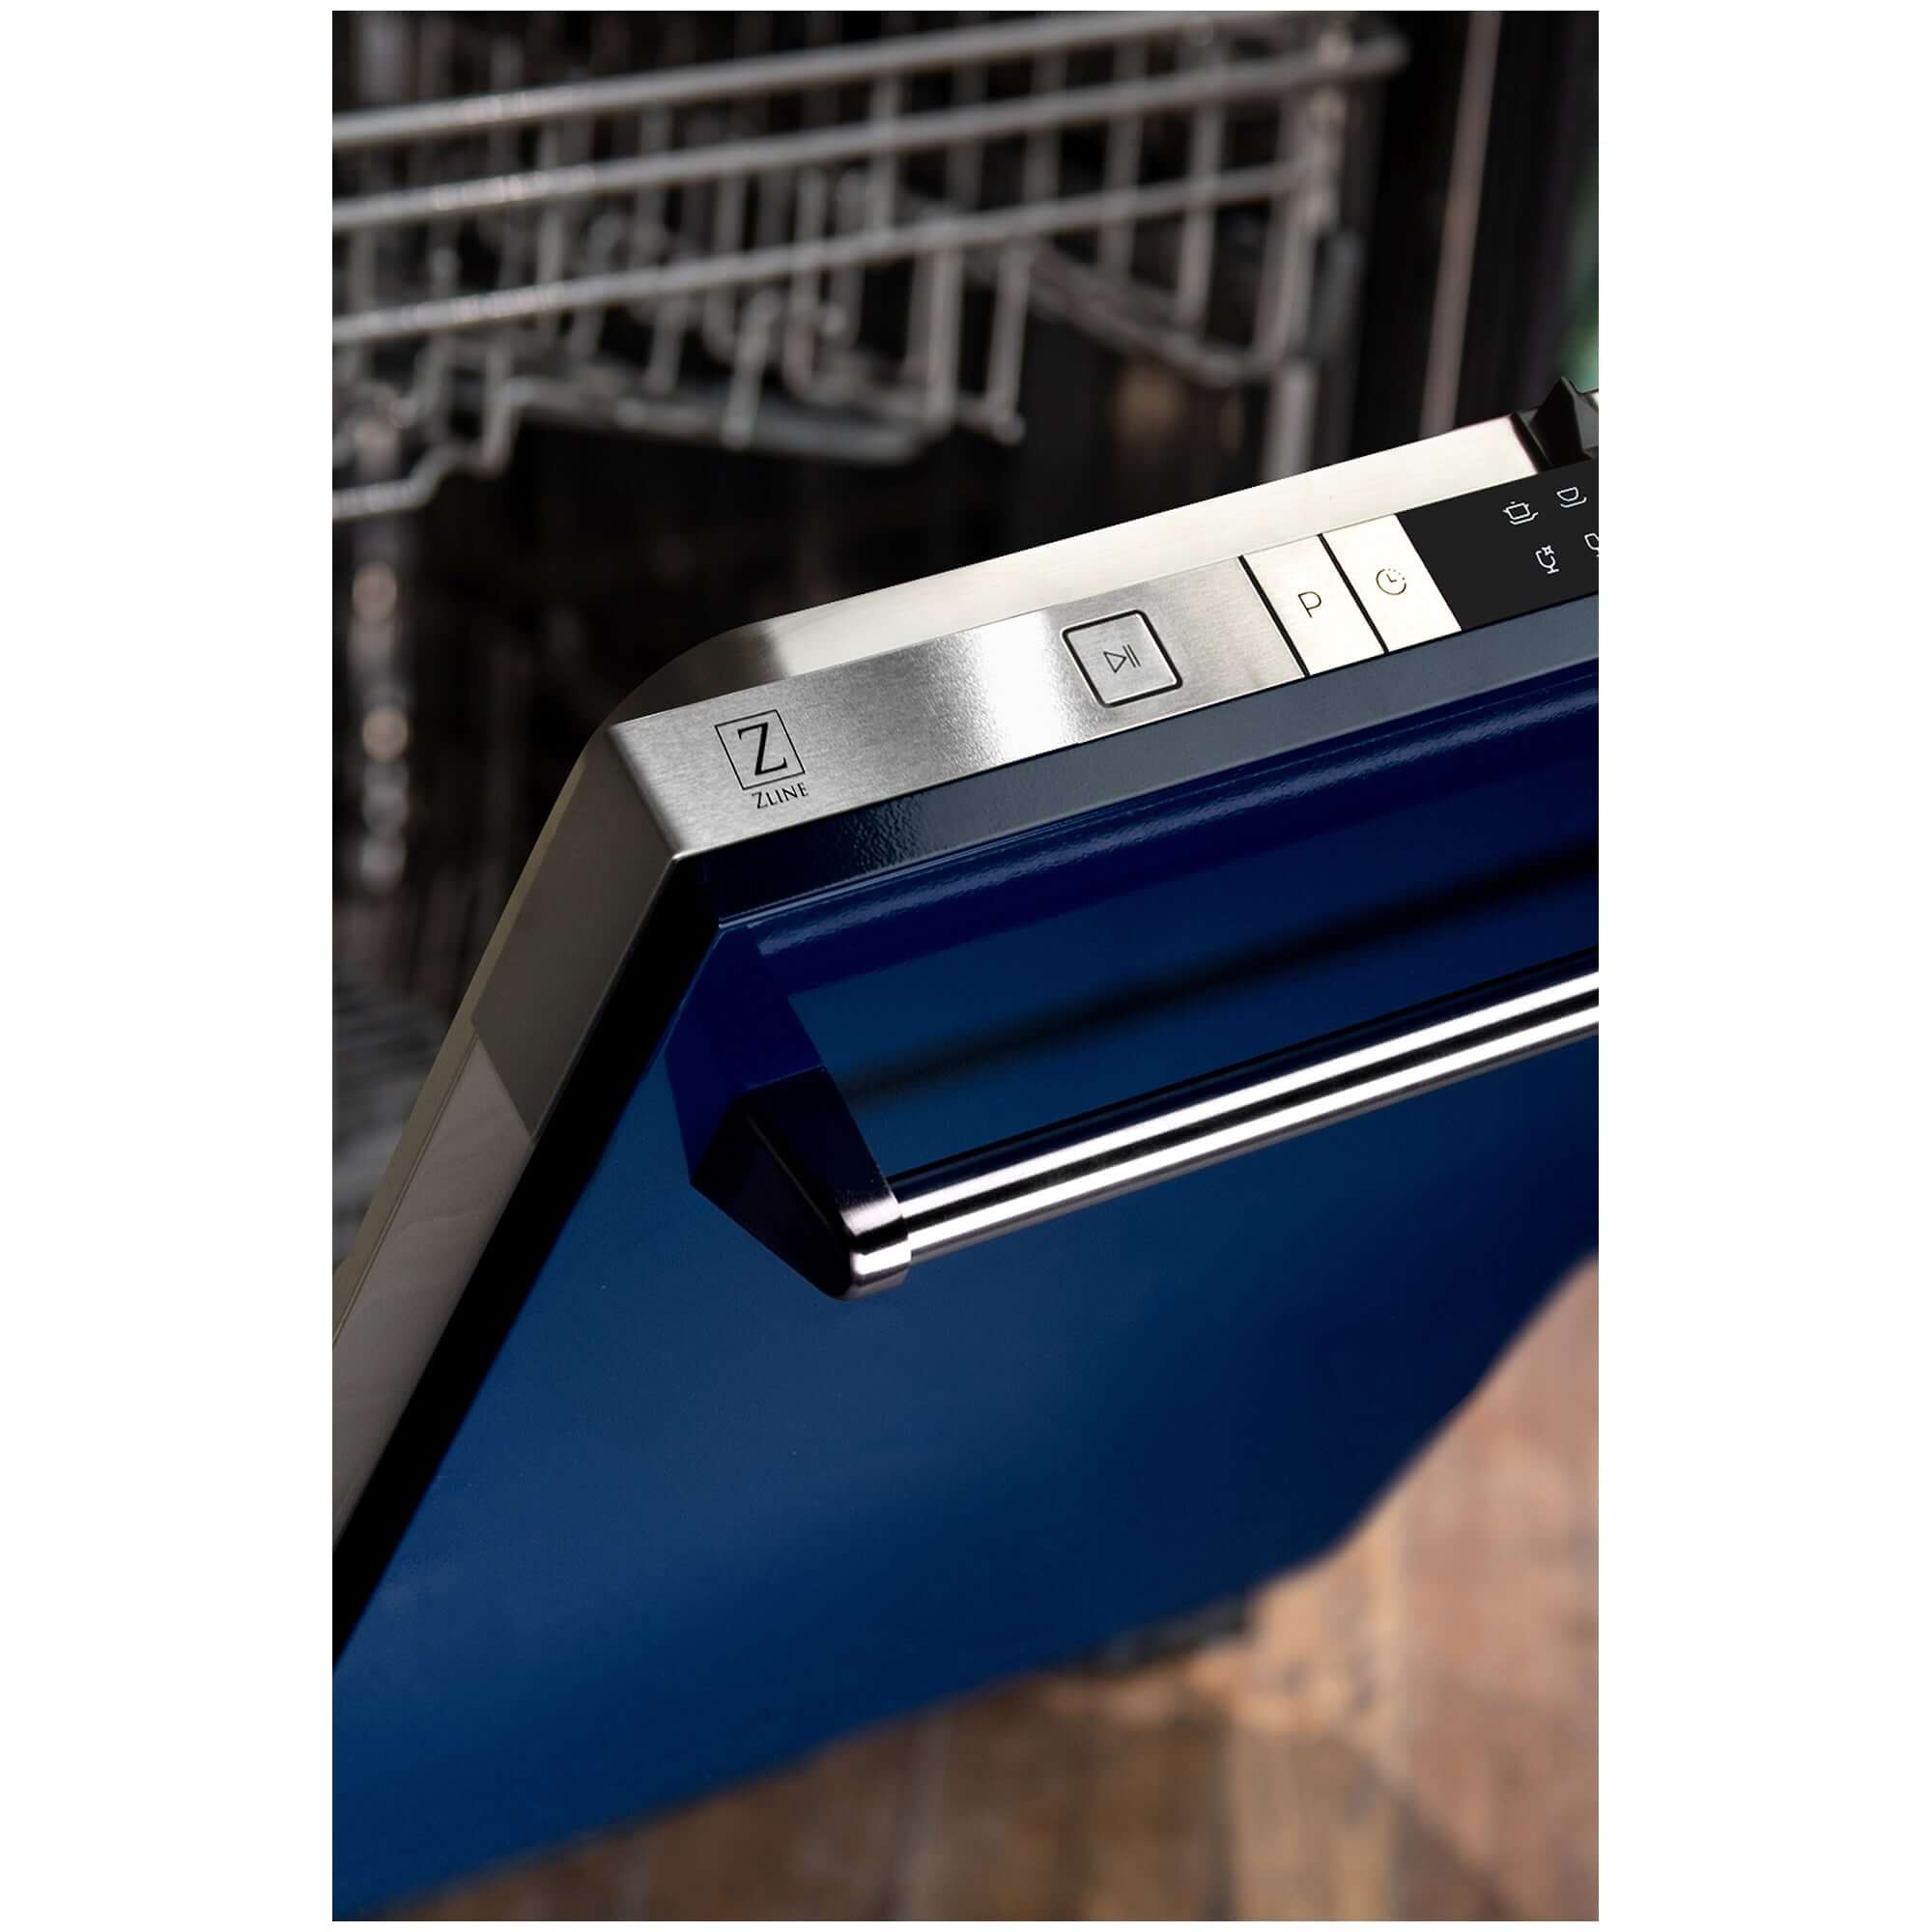 ZLINE 24 in. Blue Gloss Top Control Built-In Dishwasher with Stainless Steel Tub and Traditional Style Handle, 52dBa (DW-BG-24)